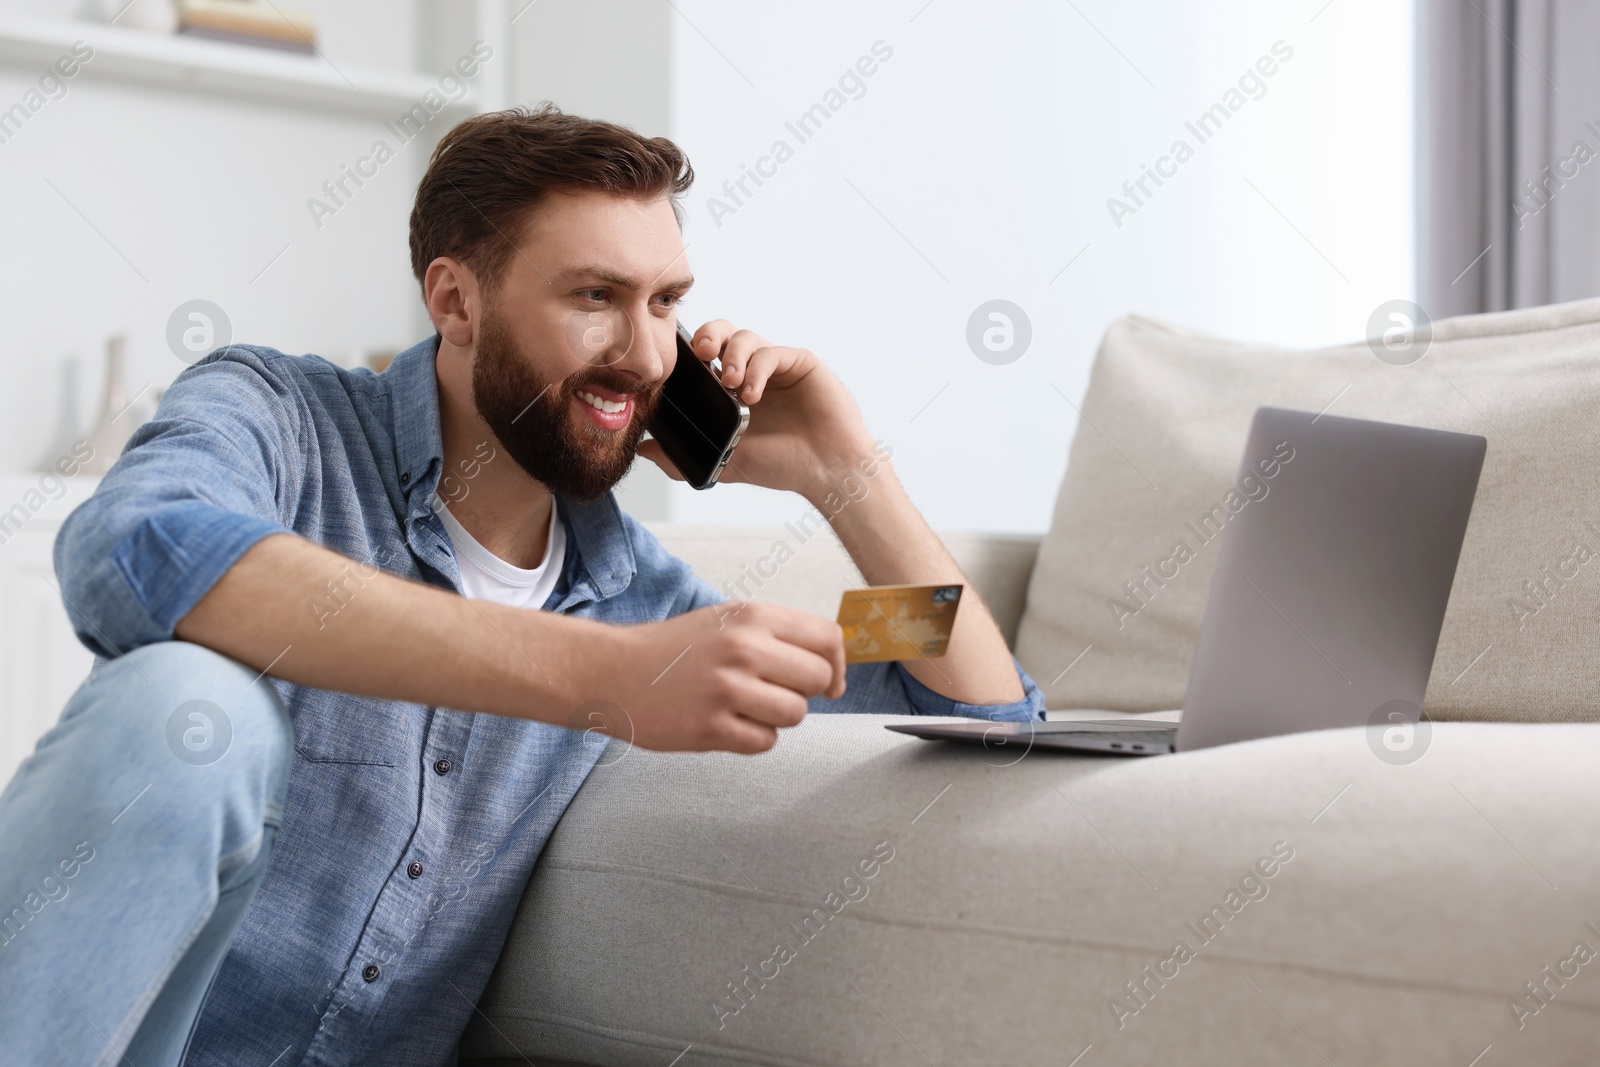 Photo of Online banking. Happy young man with credit card talking by smartphone at home